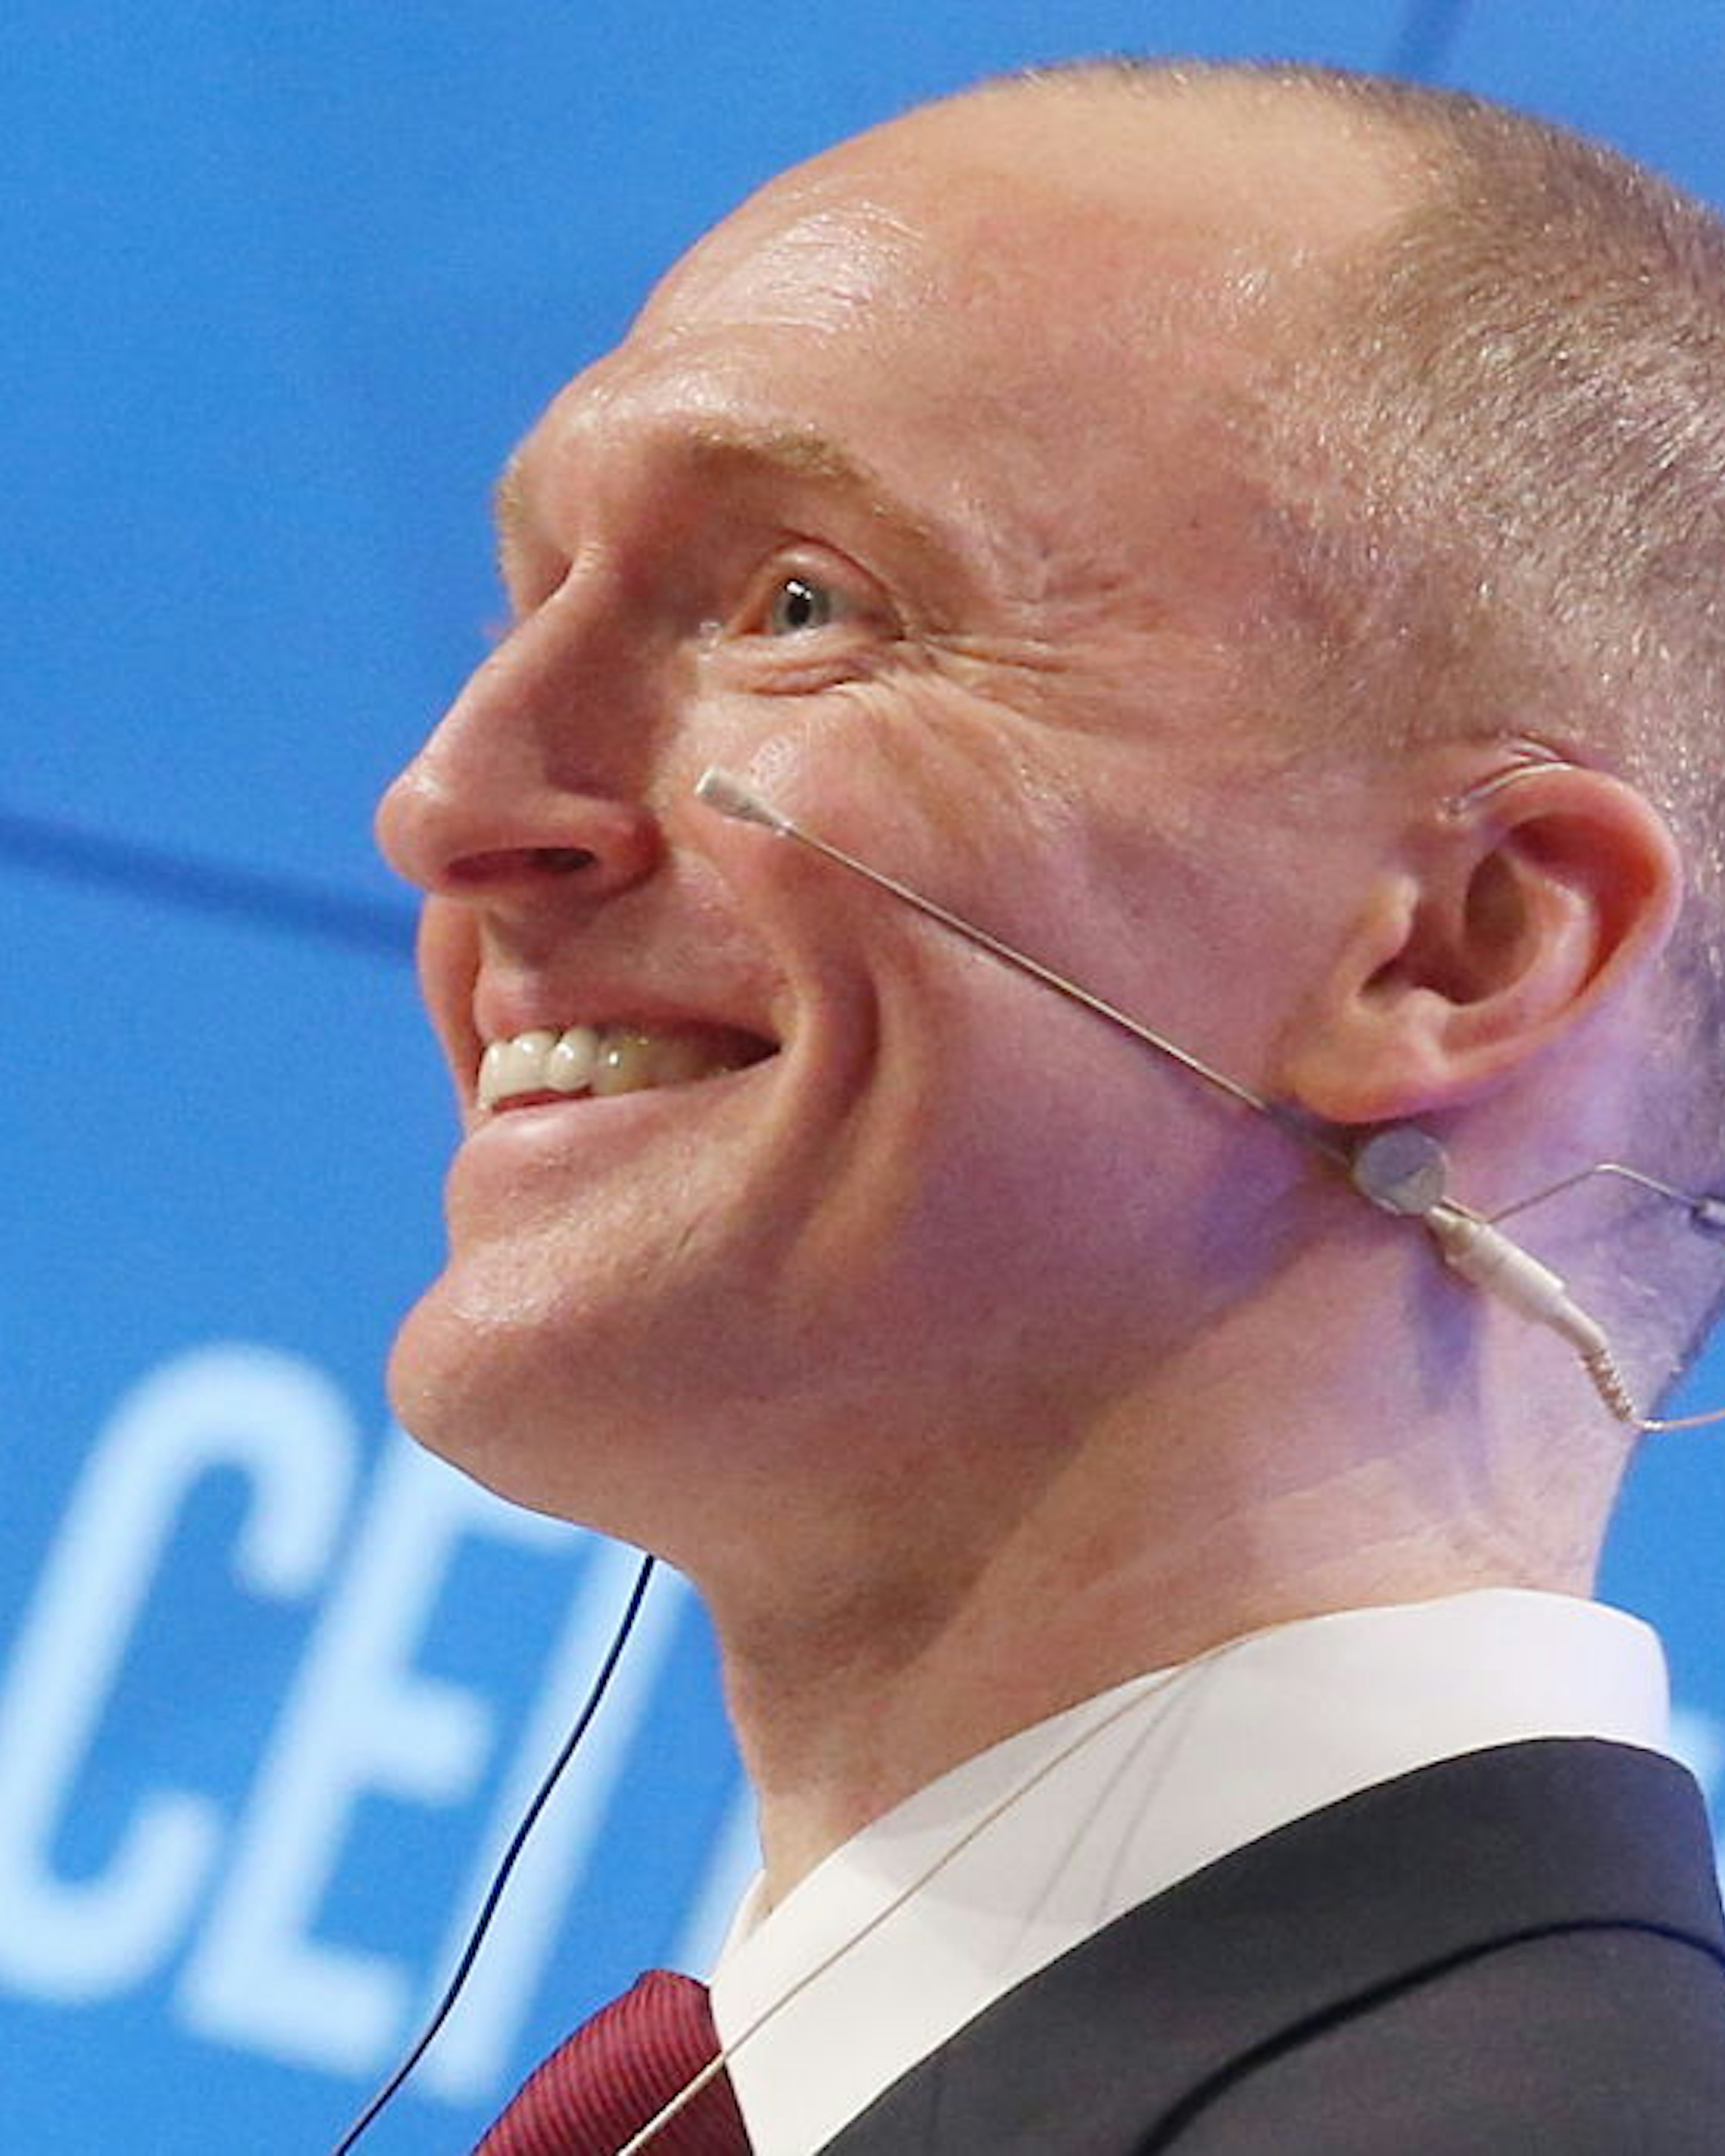 Carter Page, Global Energy Capital LLC Managing Partner and a former foreign policy adviser to U.S. President-Elect Donald Trump, makes a presentation titled " Departing from Hypocrisy: Potential Strategies in the Era of Global Economic Stagnation, Security Threats and Fake News" during his visit to Moscow.